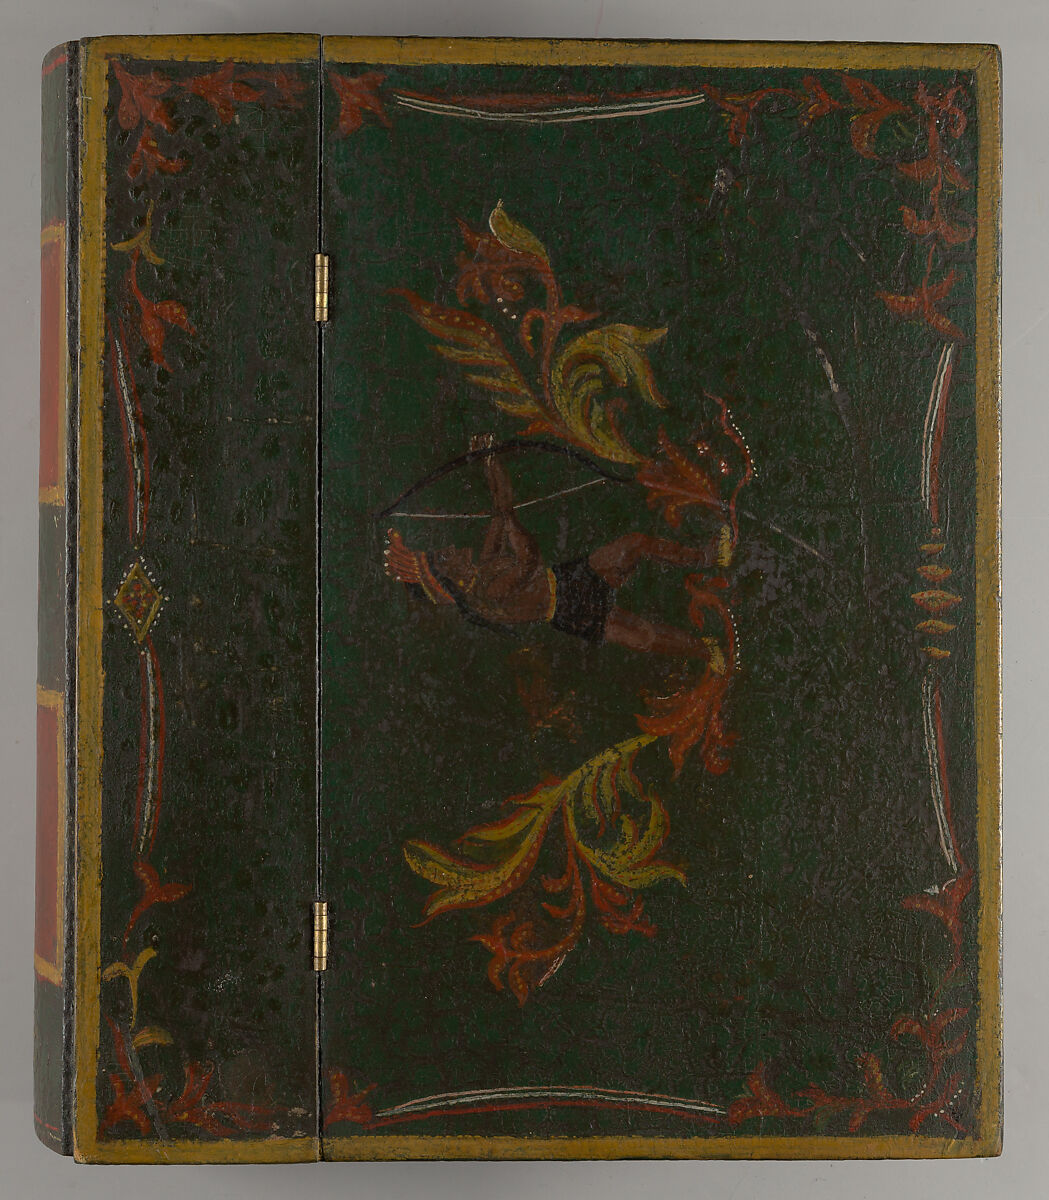 Painted table box in the form of a book, native American motif 